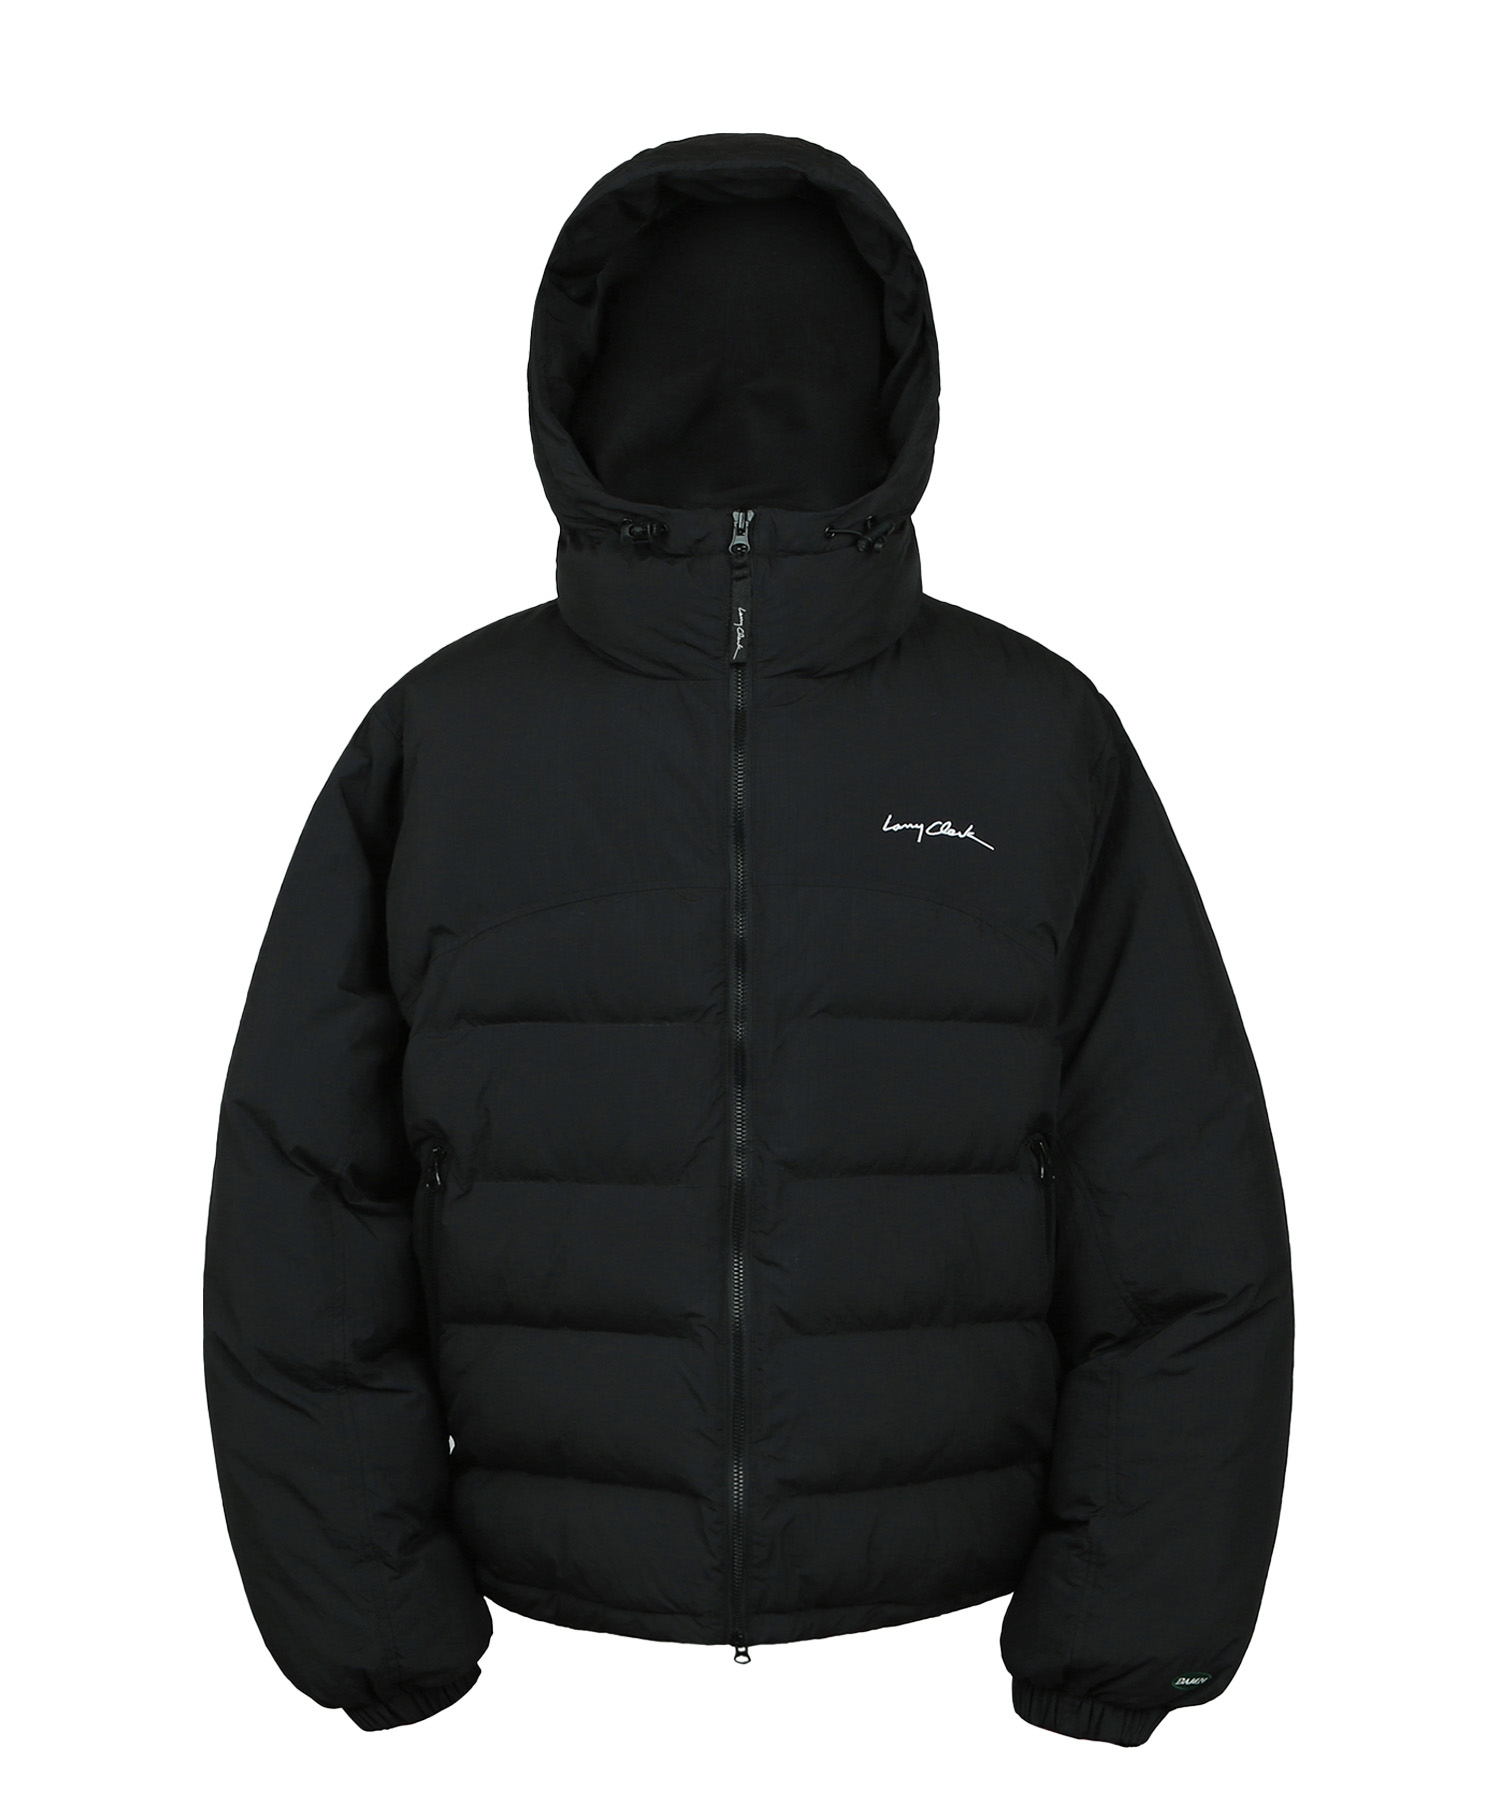 L.C QUILTING HOODED ZIP UP BLACK